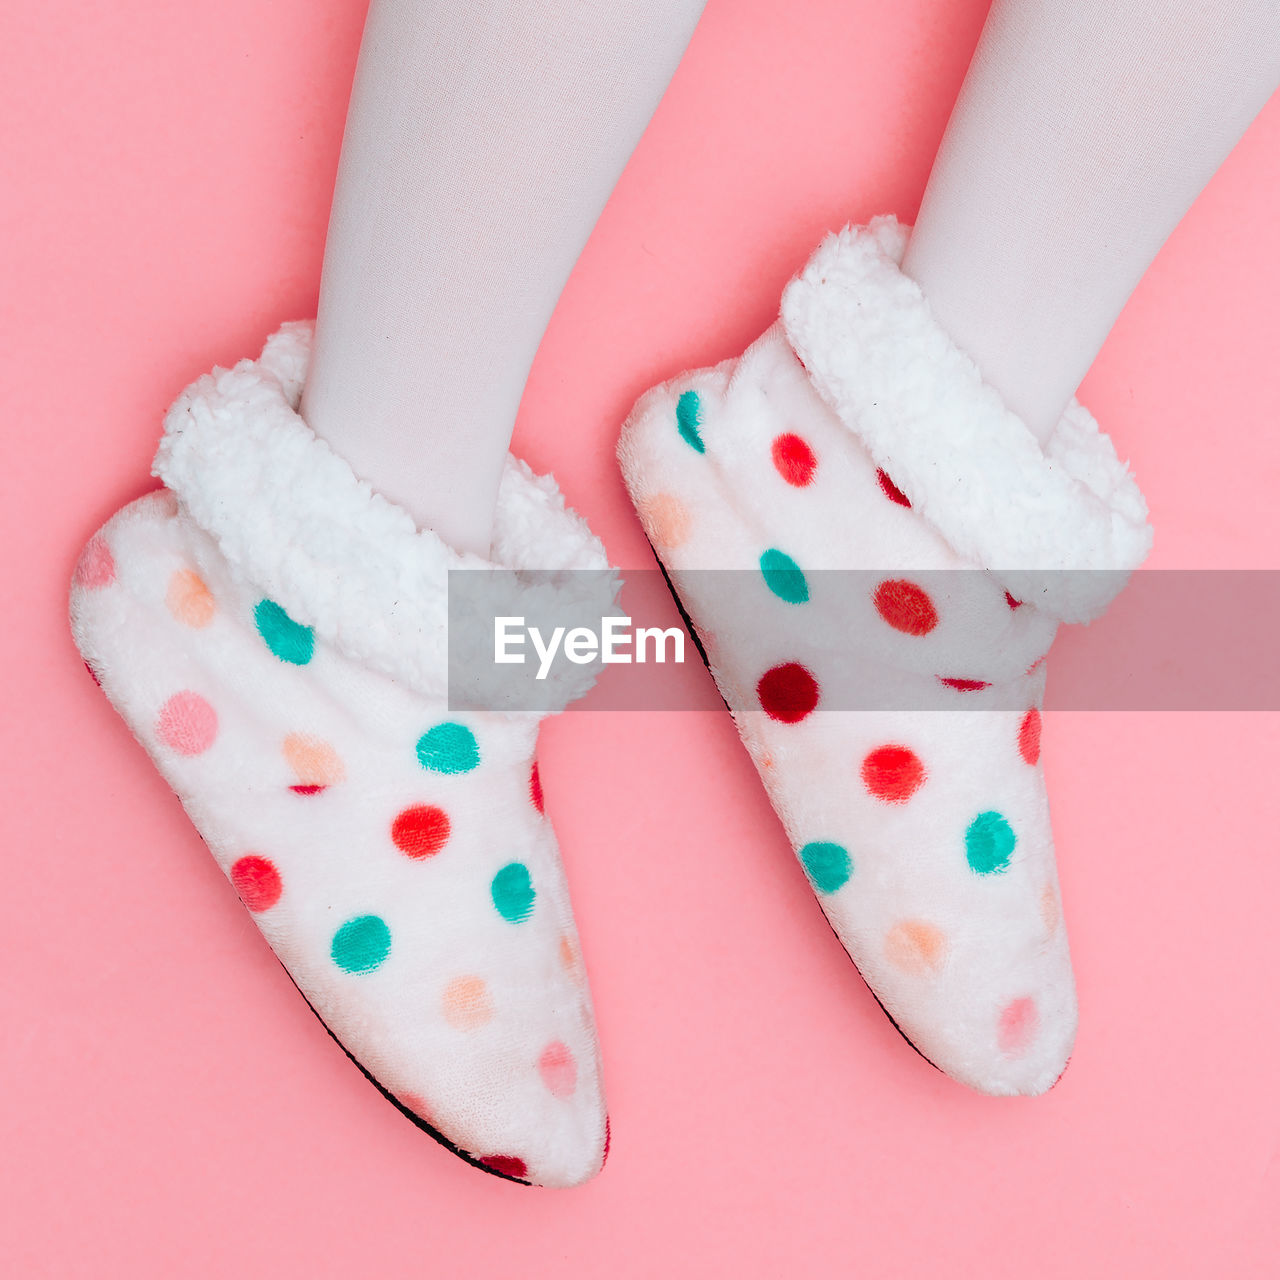 Low section view of polka dot shoes against pink background